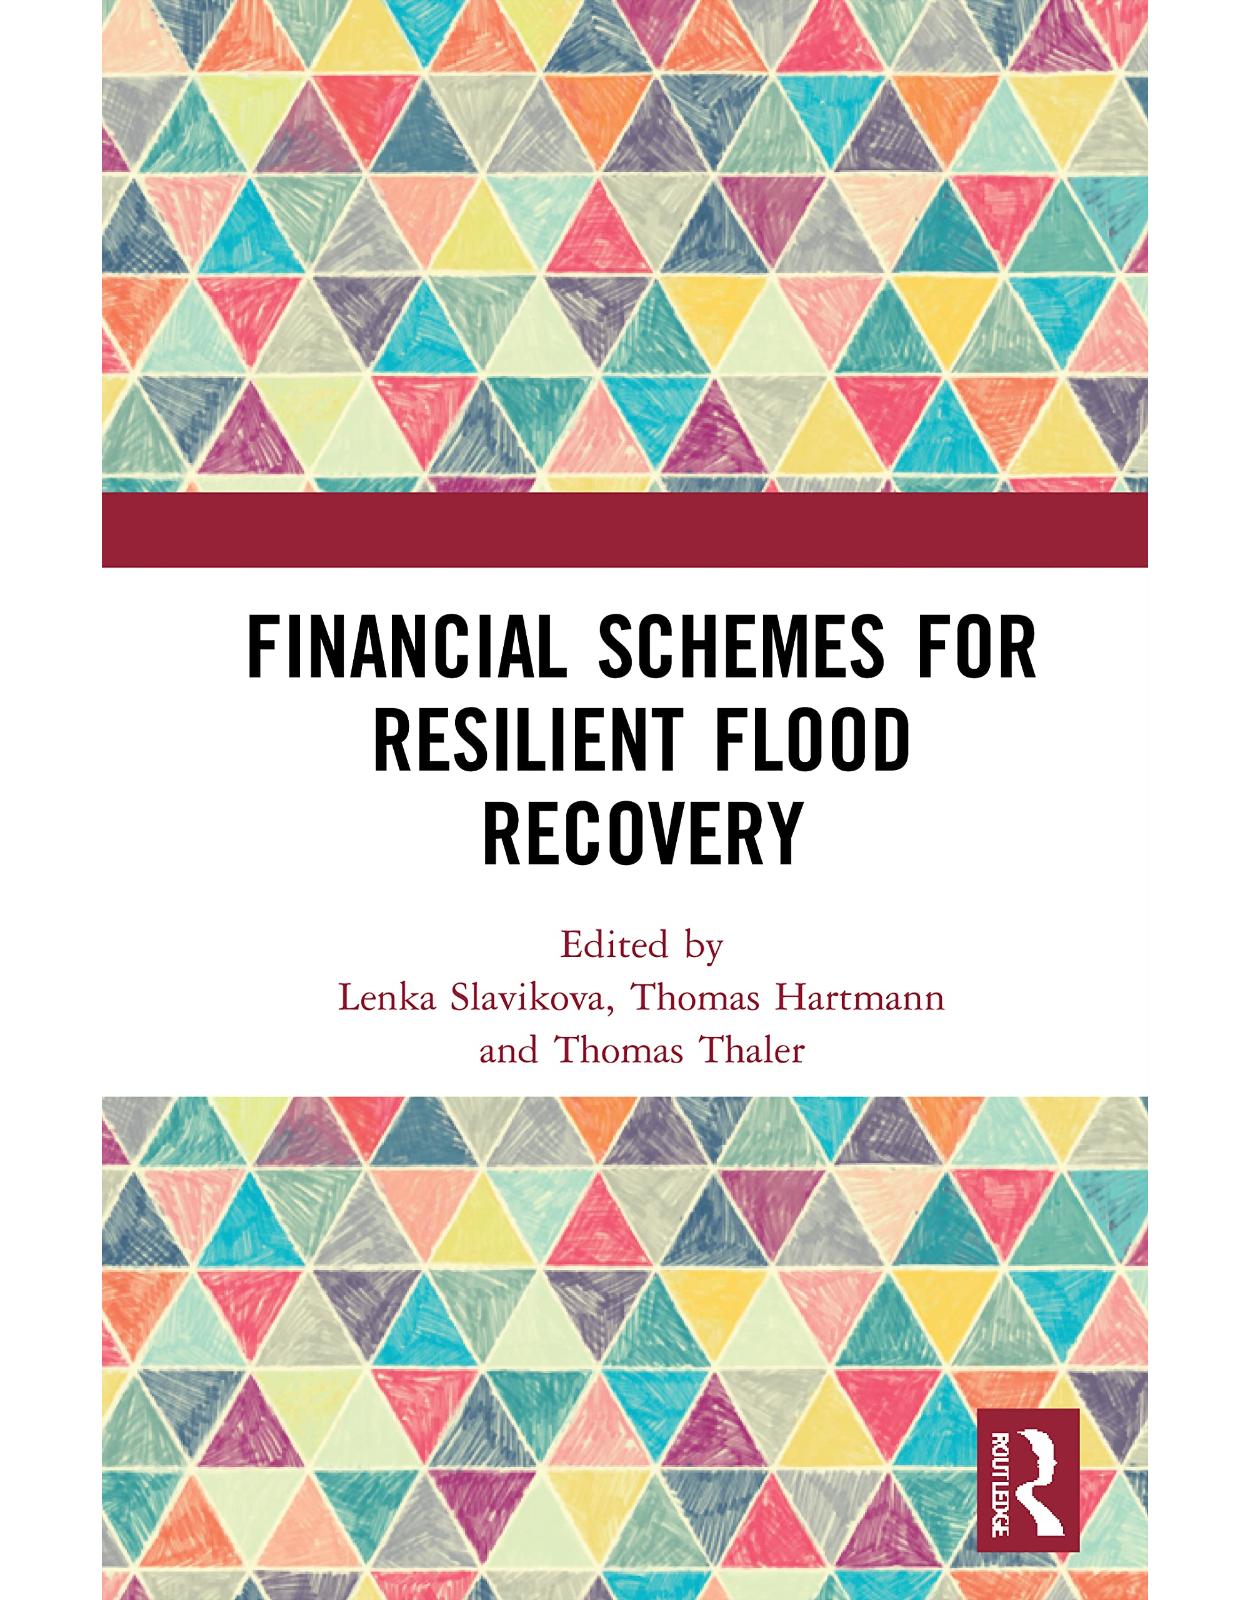 Financial Schemes for Resilient Flood Recovery